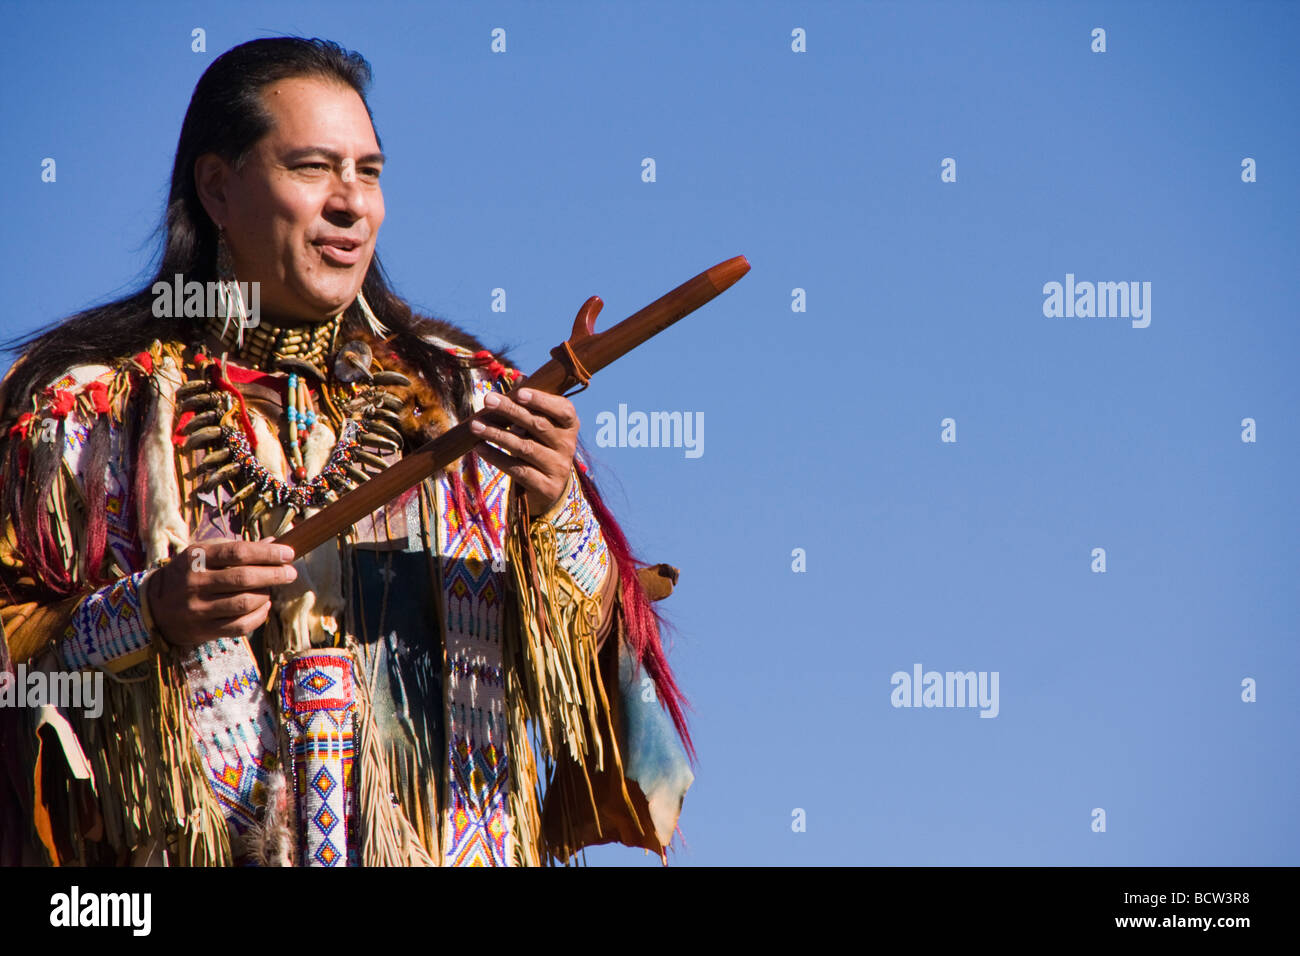 Lakota man in traditional clothing holding a flute, Donner Summit, Truckee, California, USA Stock Photo